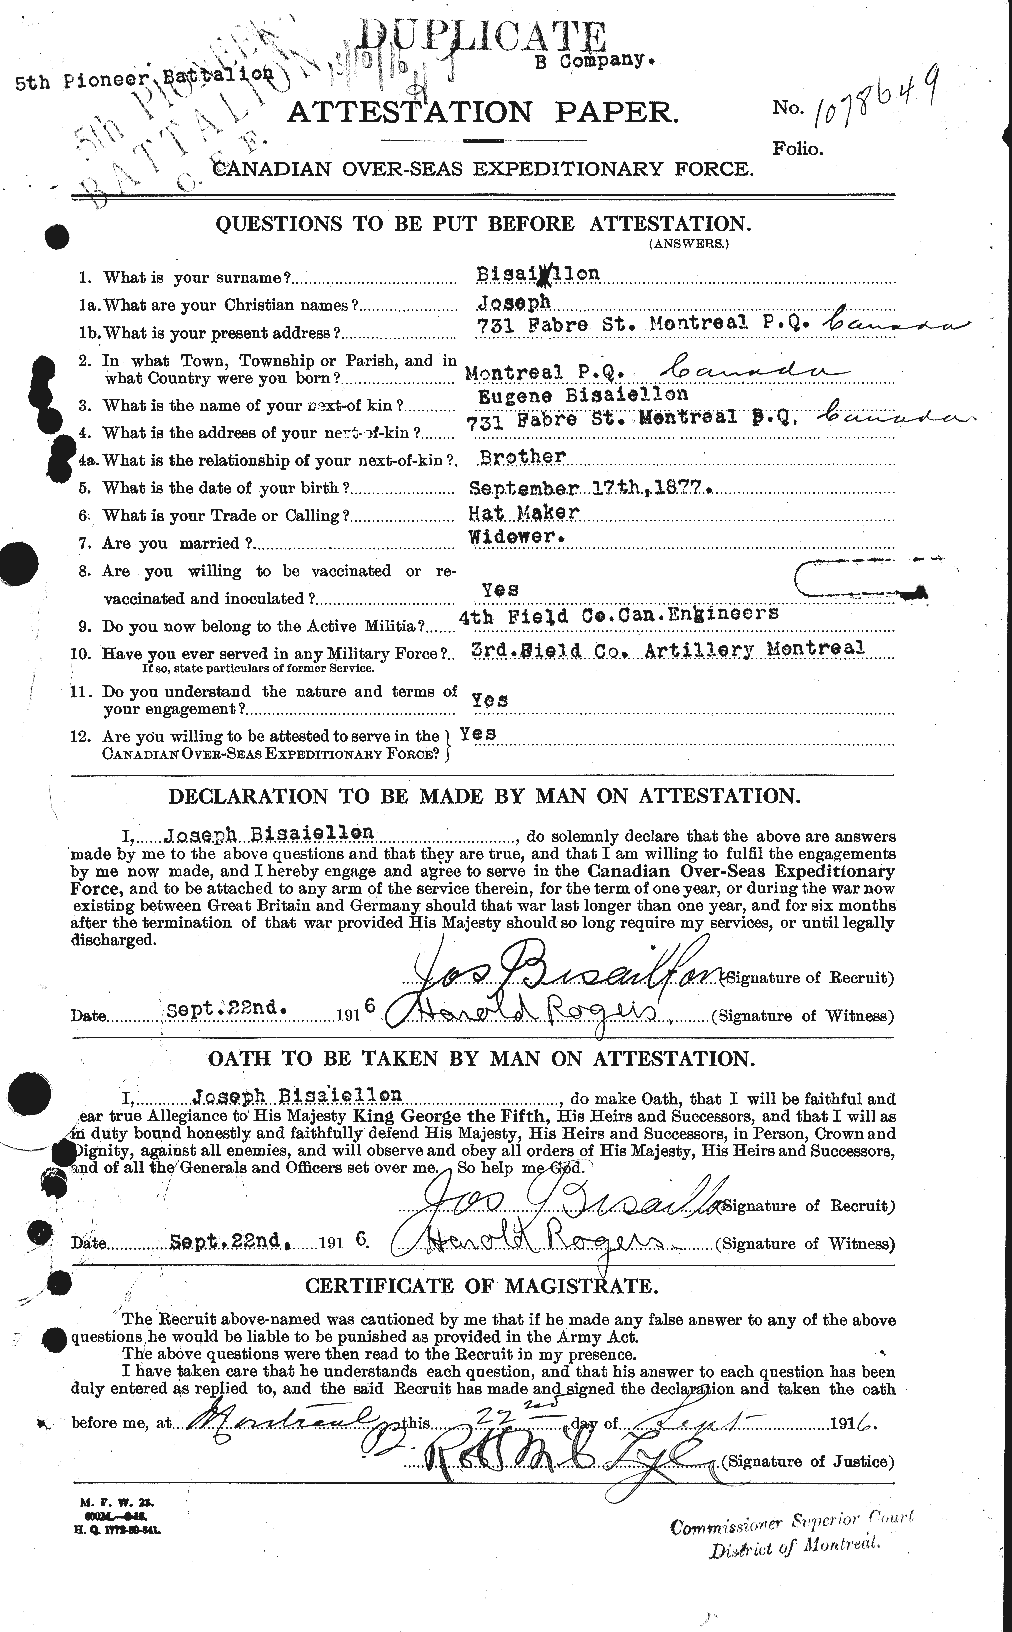 Personnel Records of the First World War - CEF 244107a